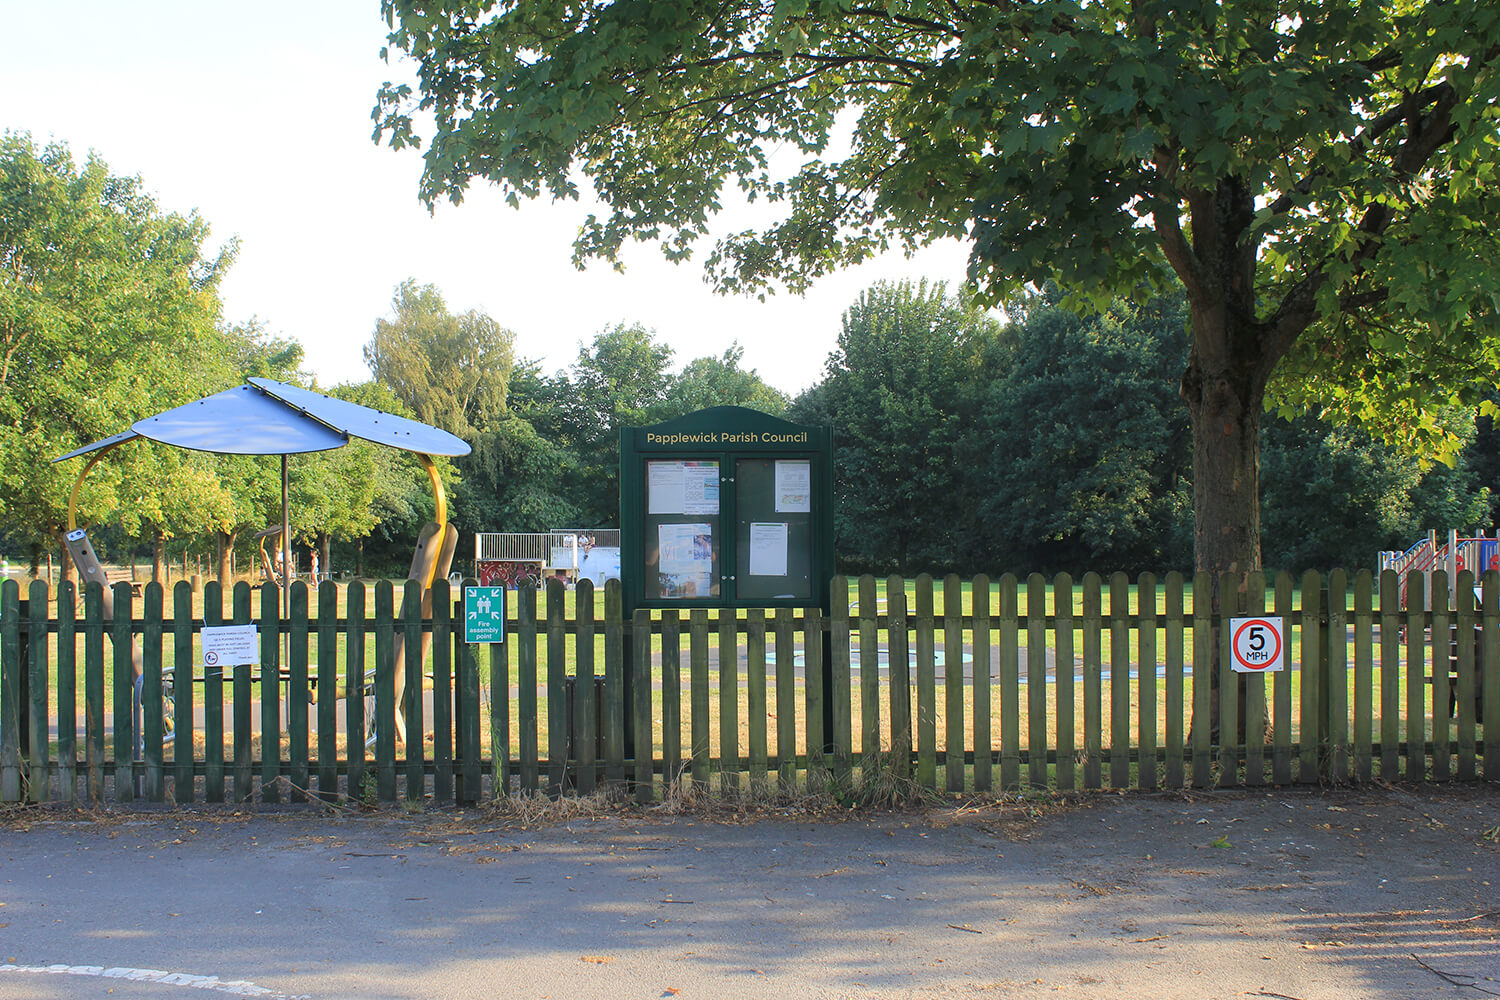 The Playing Field, behind the Village Hall